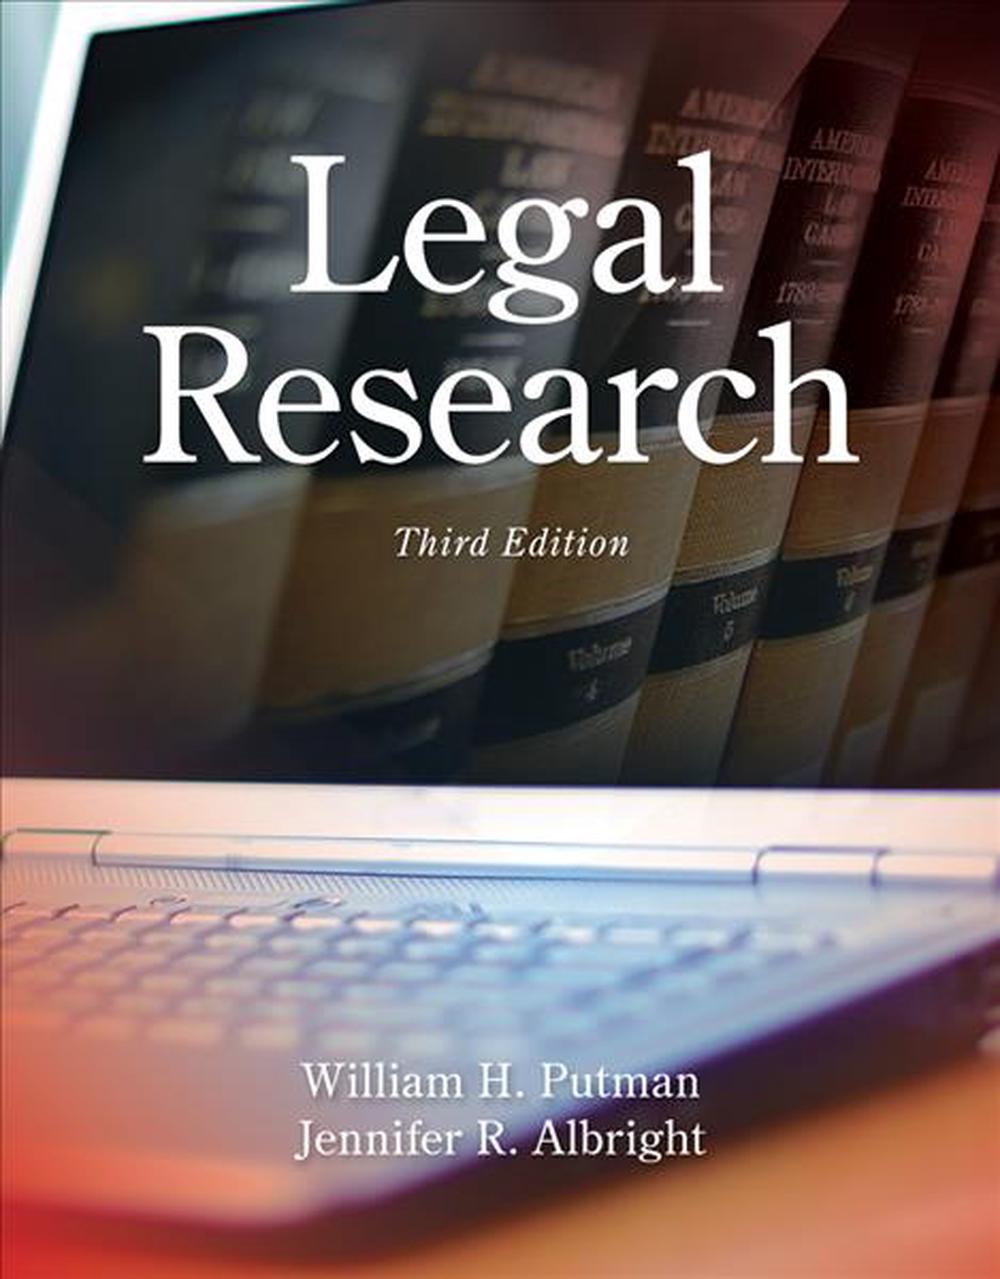 research articles on legal issues